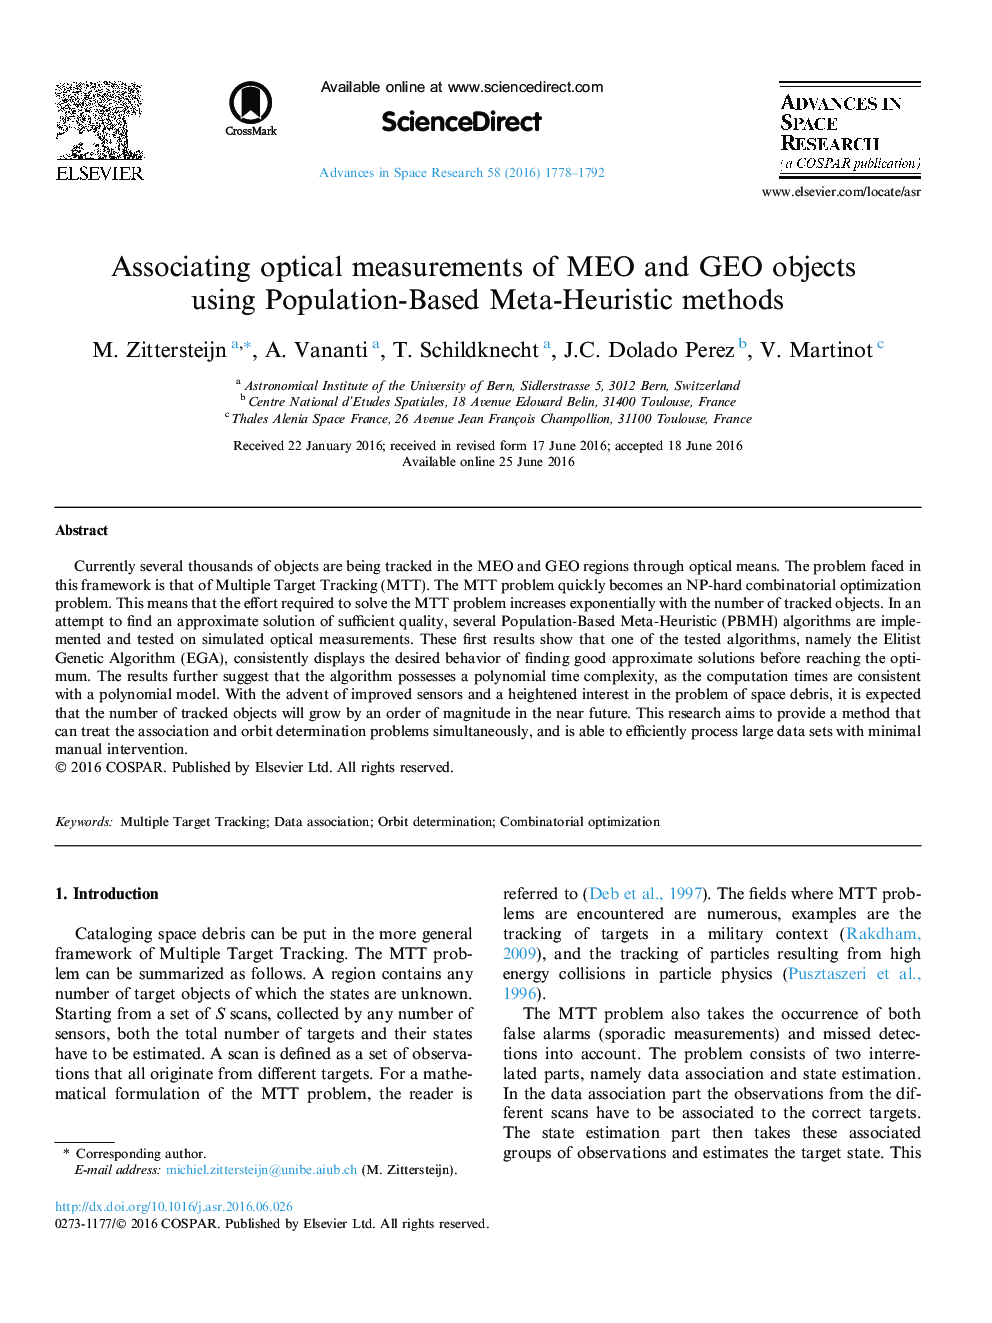 Associating optical measurements of MEO and GEO objects using Population-Based Meta-Heuristic methods